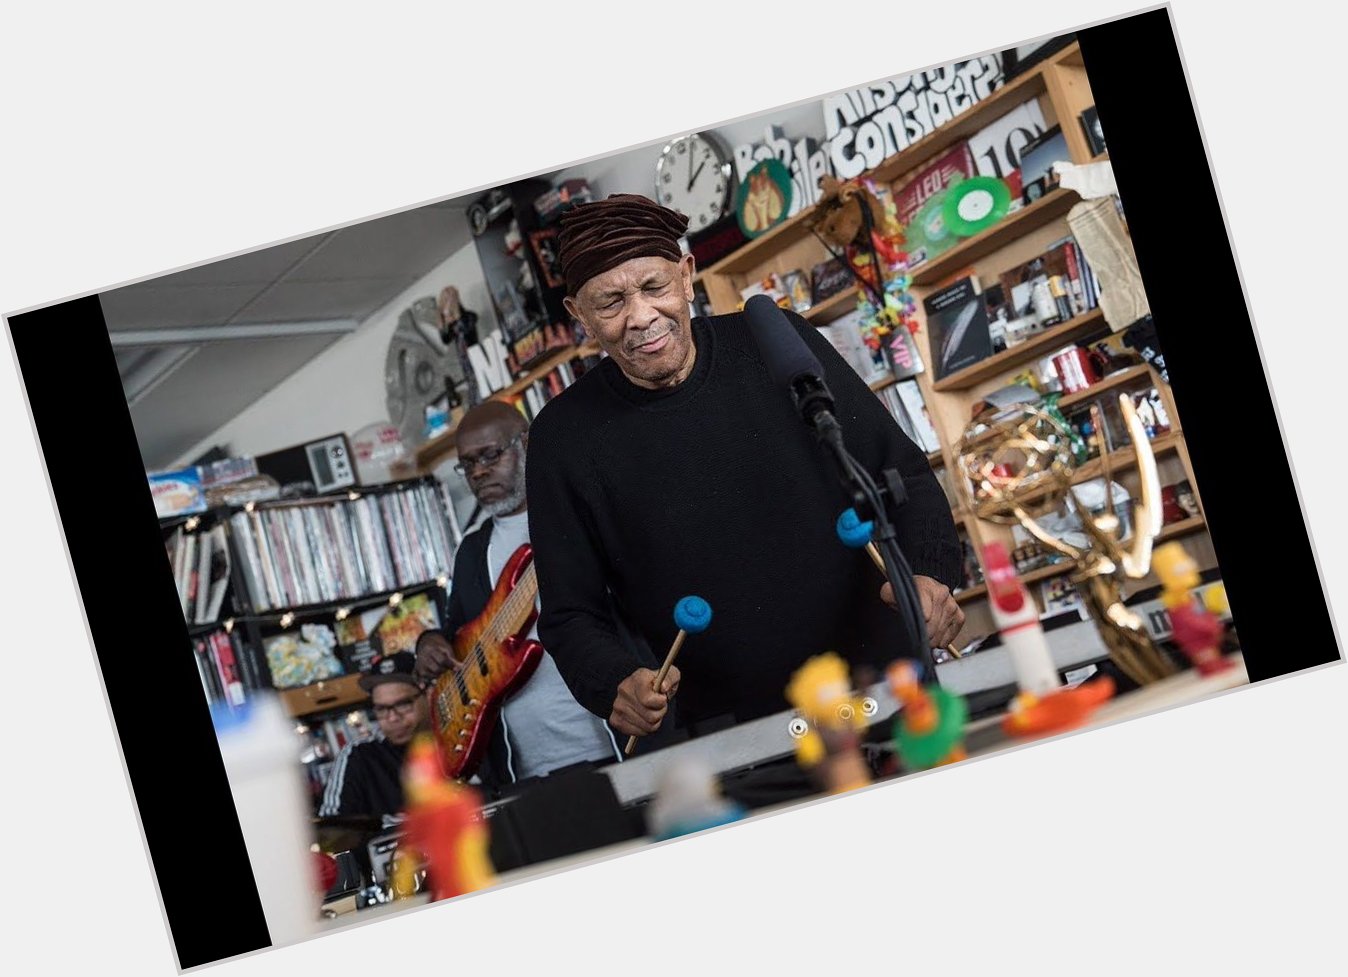 Happy Birthday, Roy Ayers!  Here is his Tiny Desk concert from 